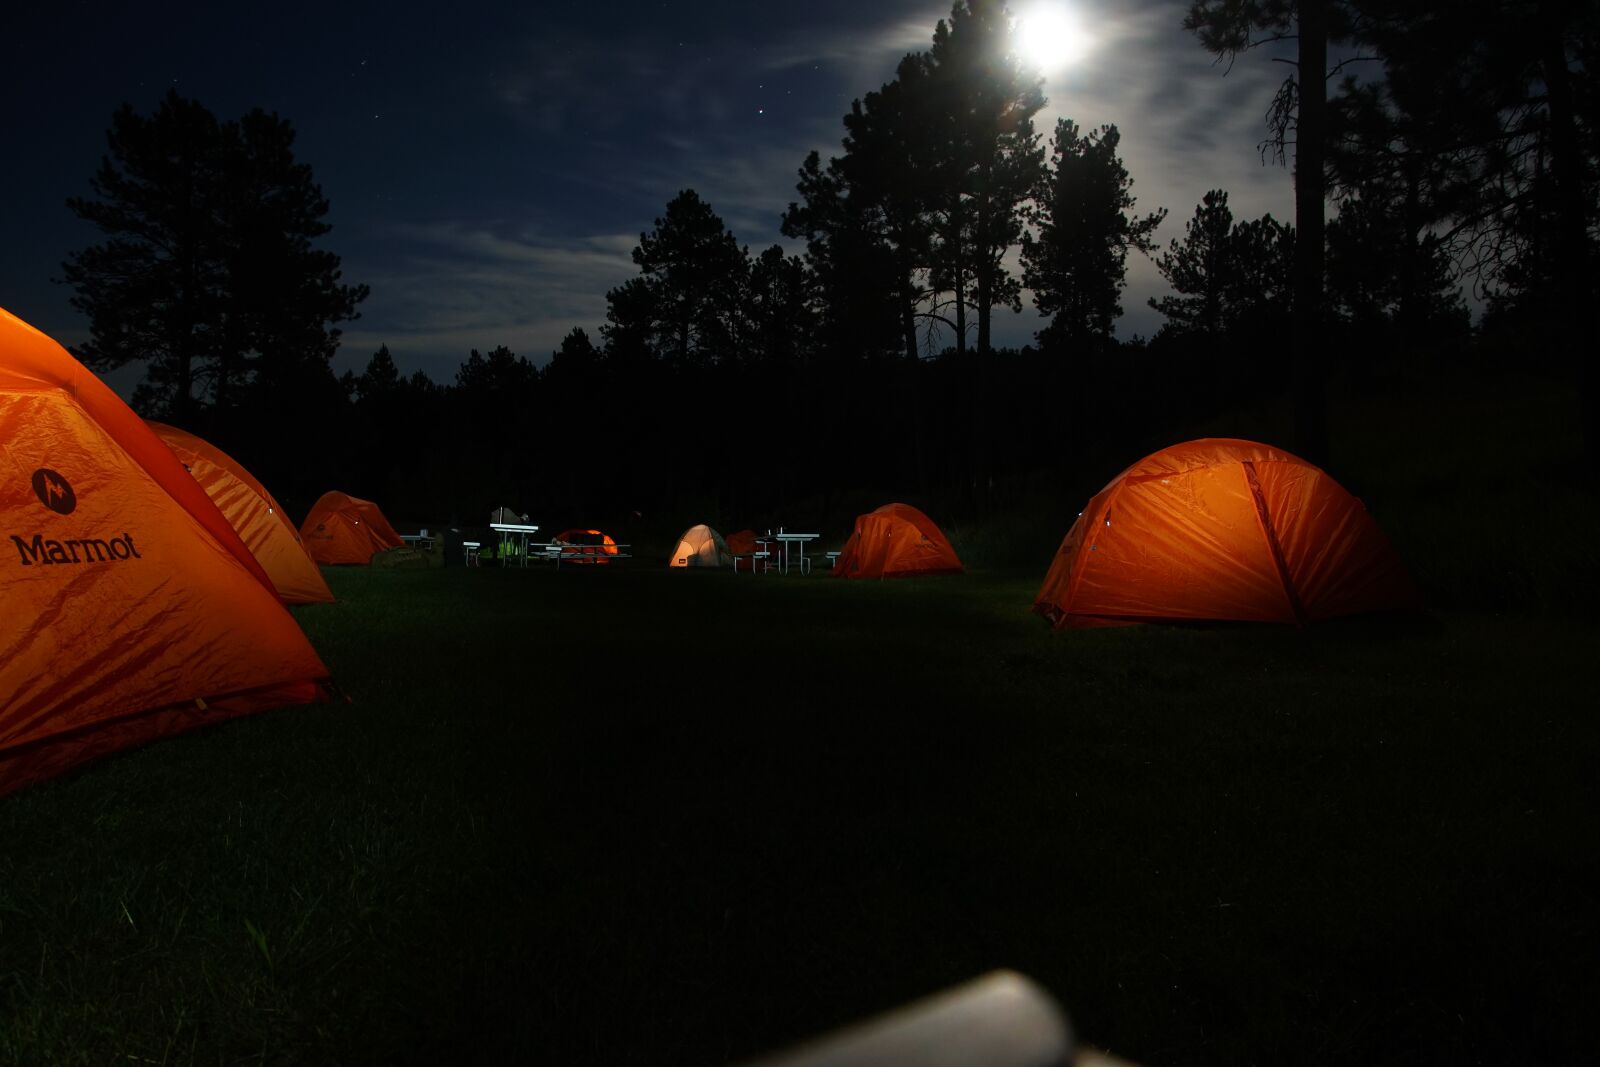 Sony a6300 sample photo. Camp, camping, night photography